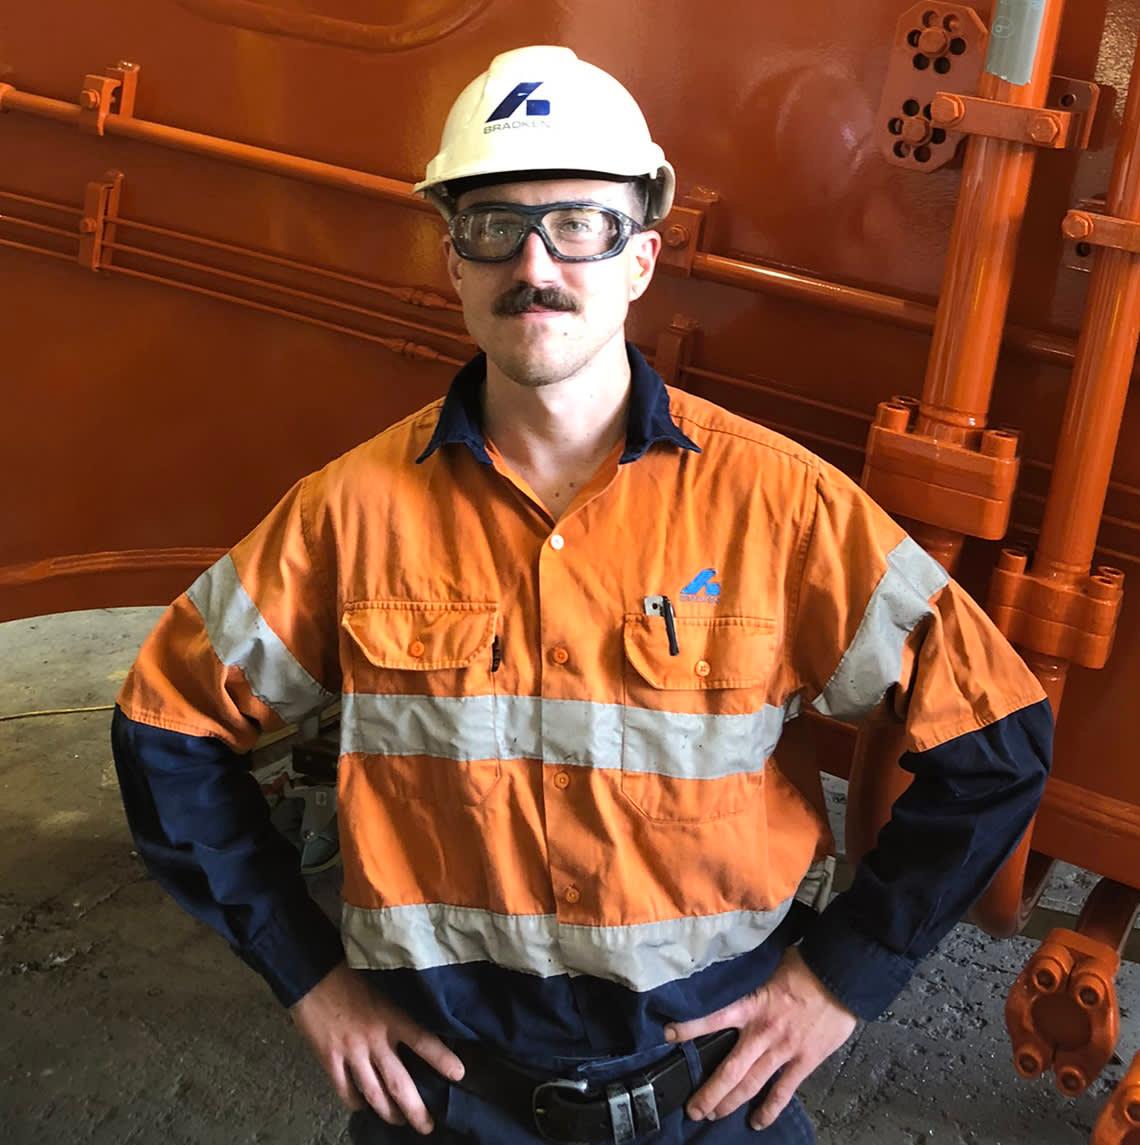 Sam Freeman from Ipswich completed his Boilermaker apprenticeship in 2022